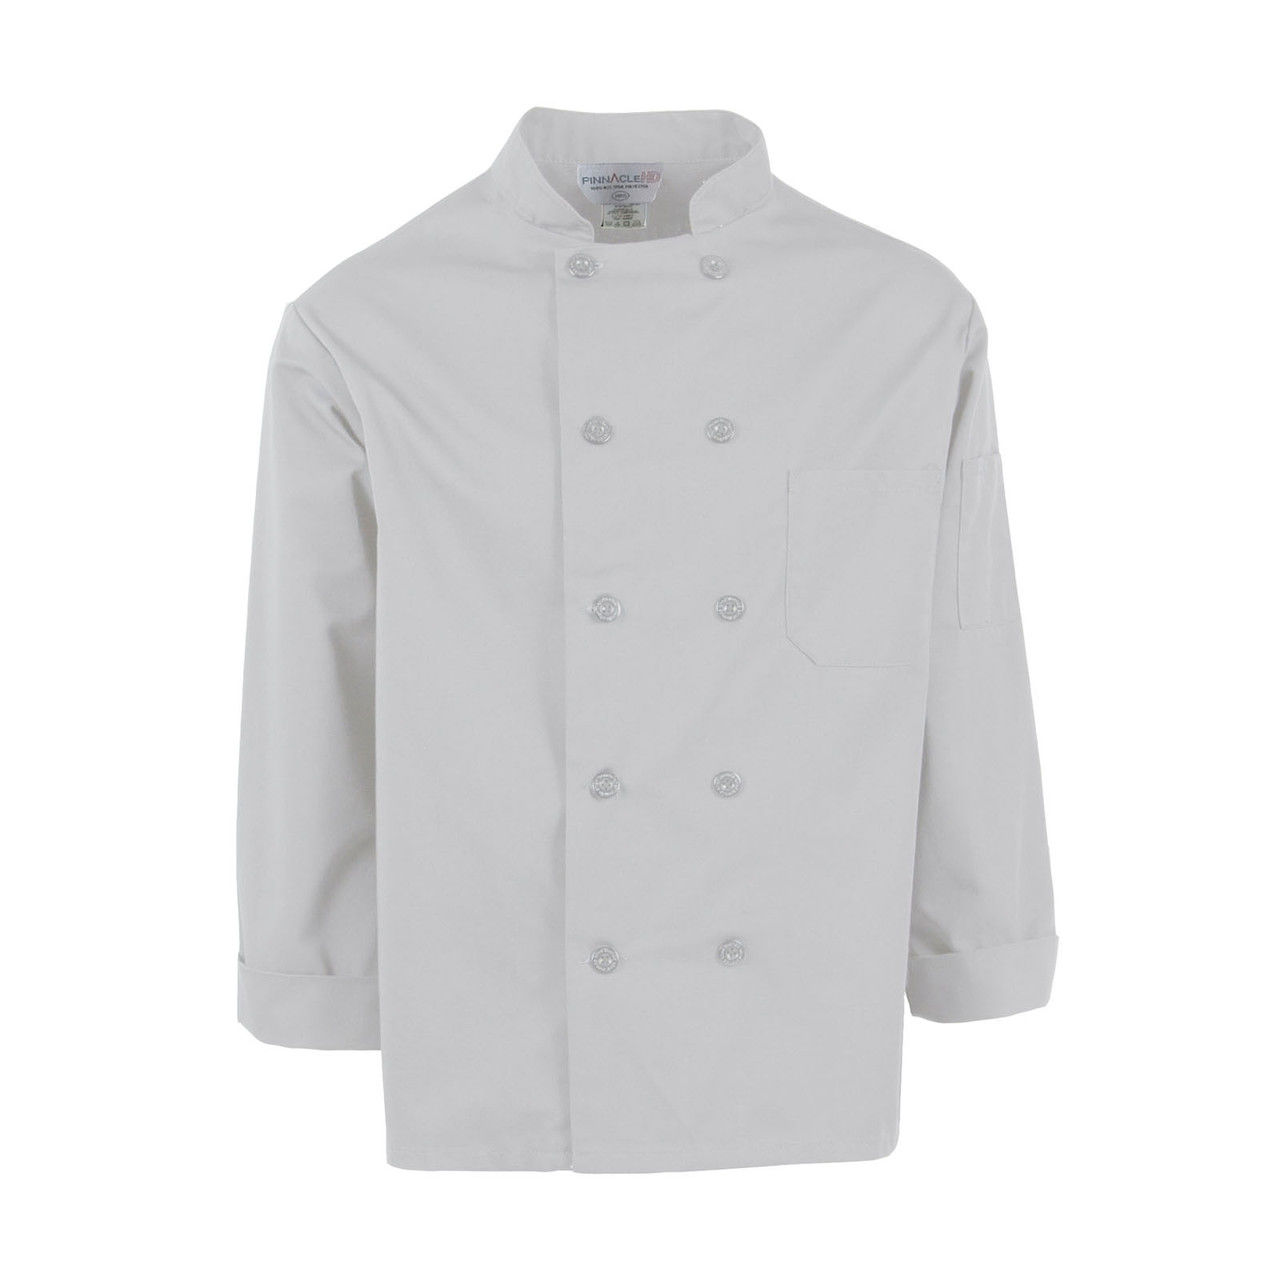 C310WH Pinnacle White Chef Coat, 10 Buttons Questions & Answers